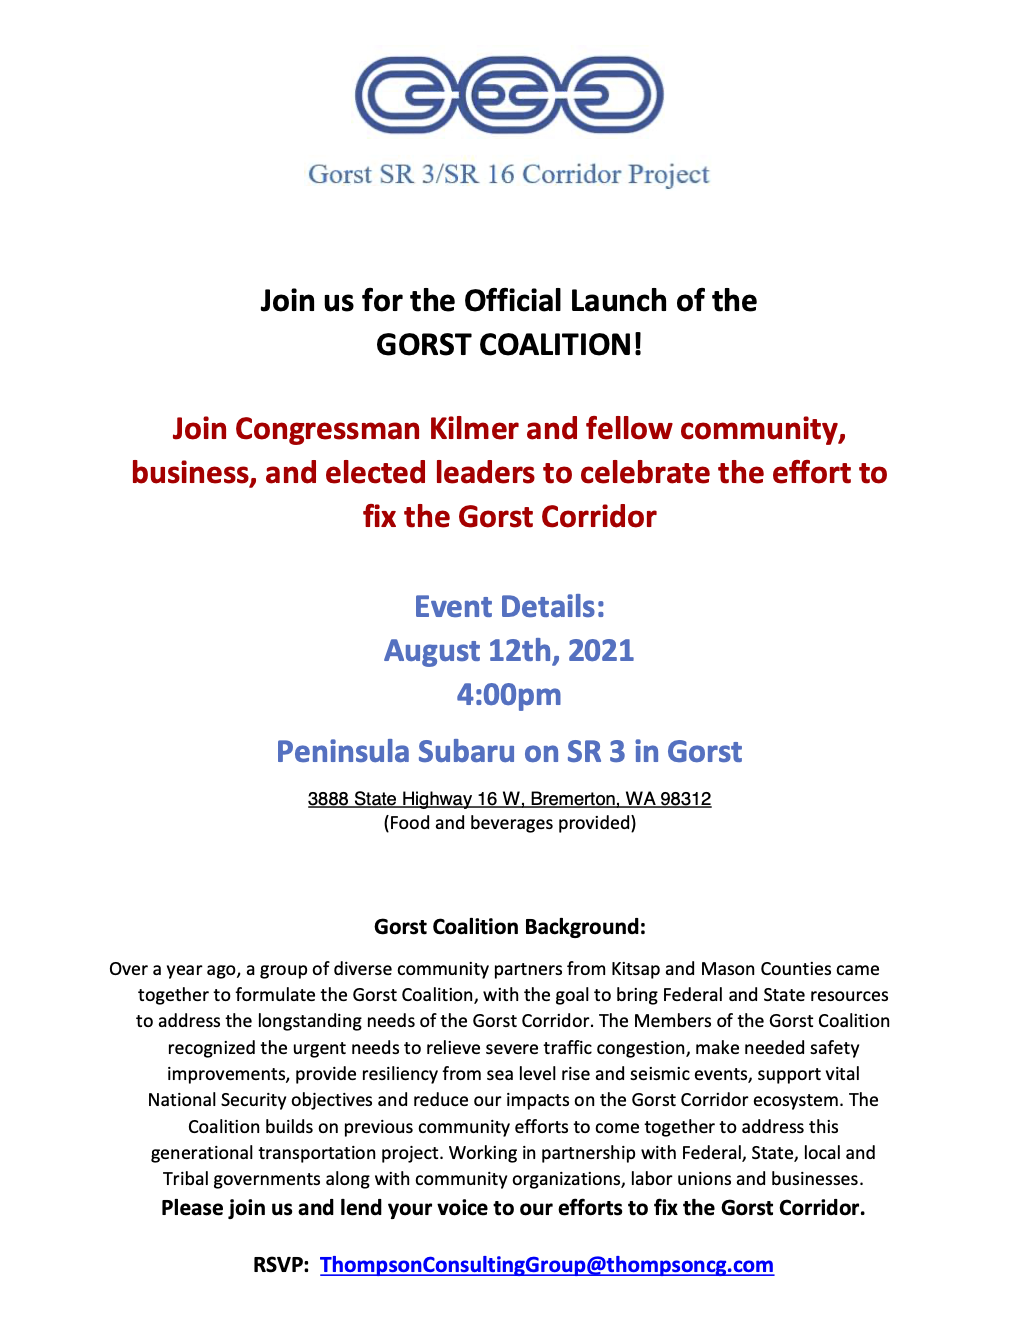 Official Launch of the GORST COALITION!